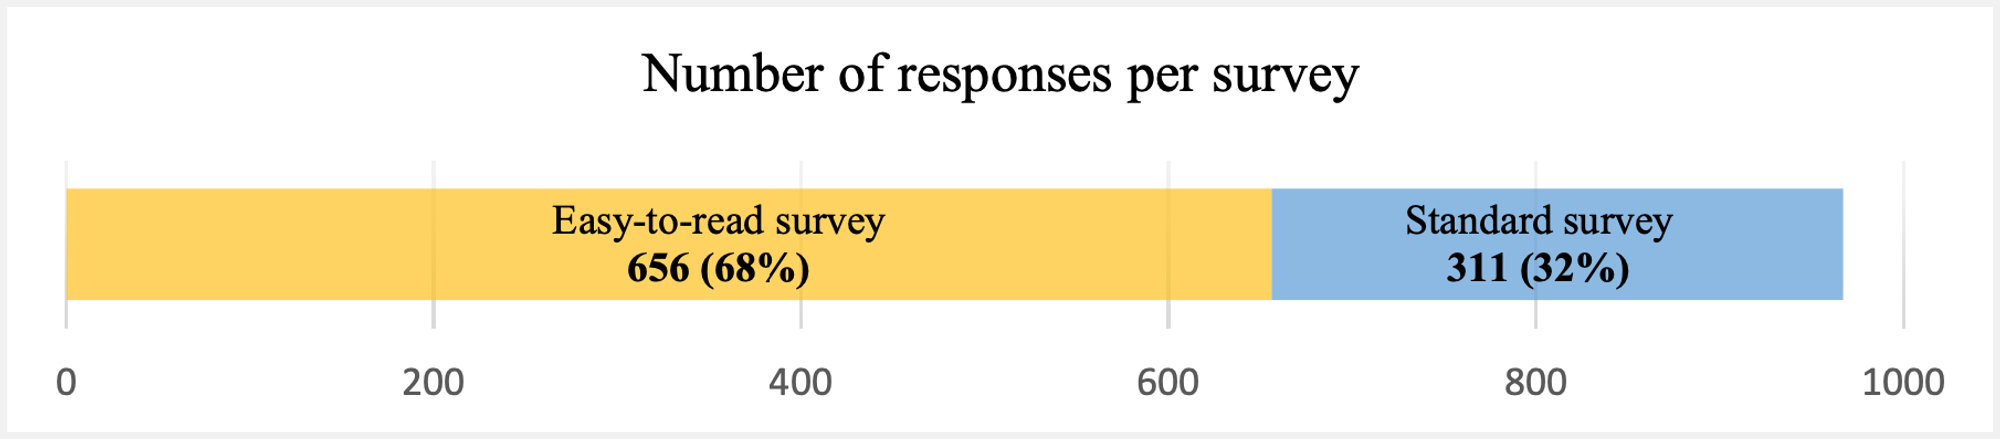 Graph showing that easy-to-read survey had 68% of total responses